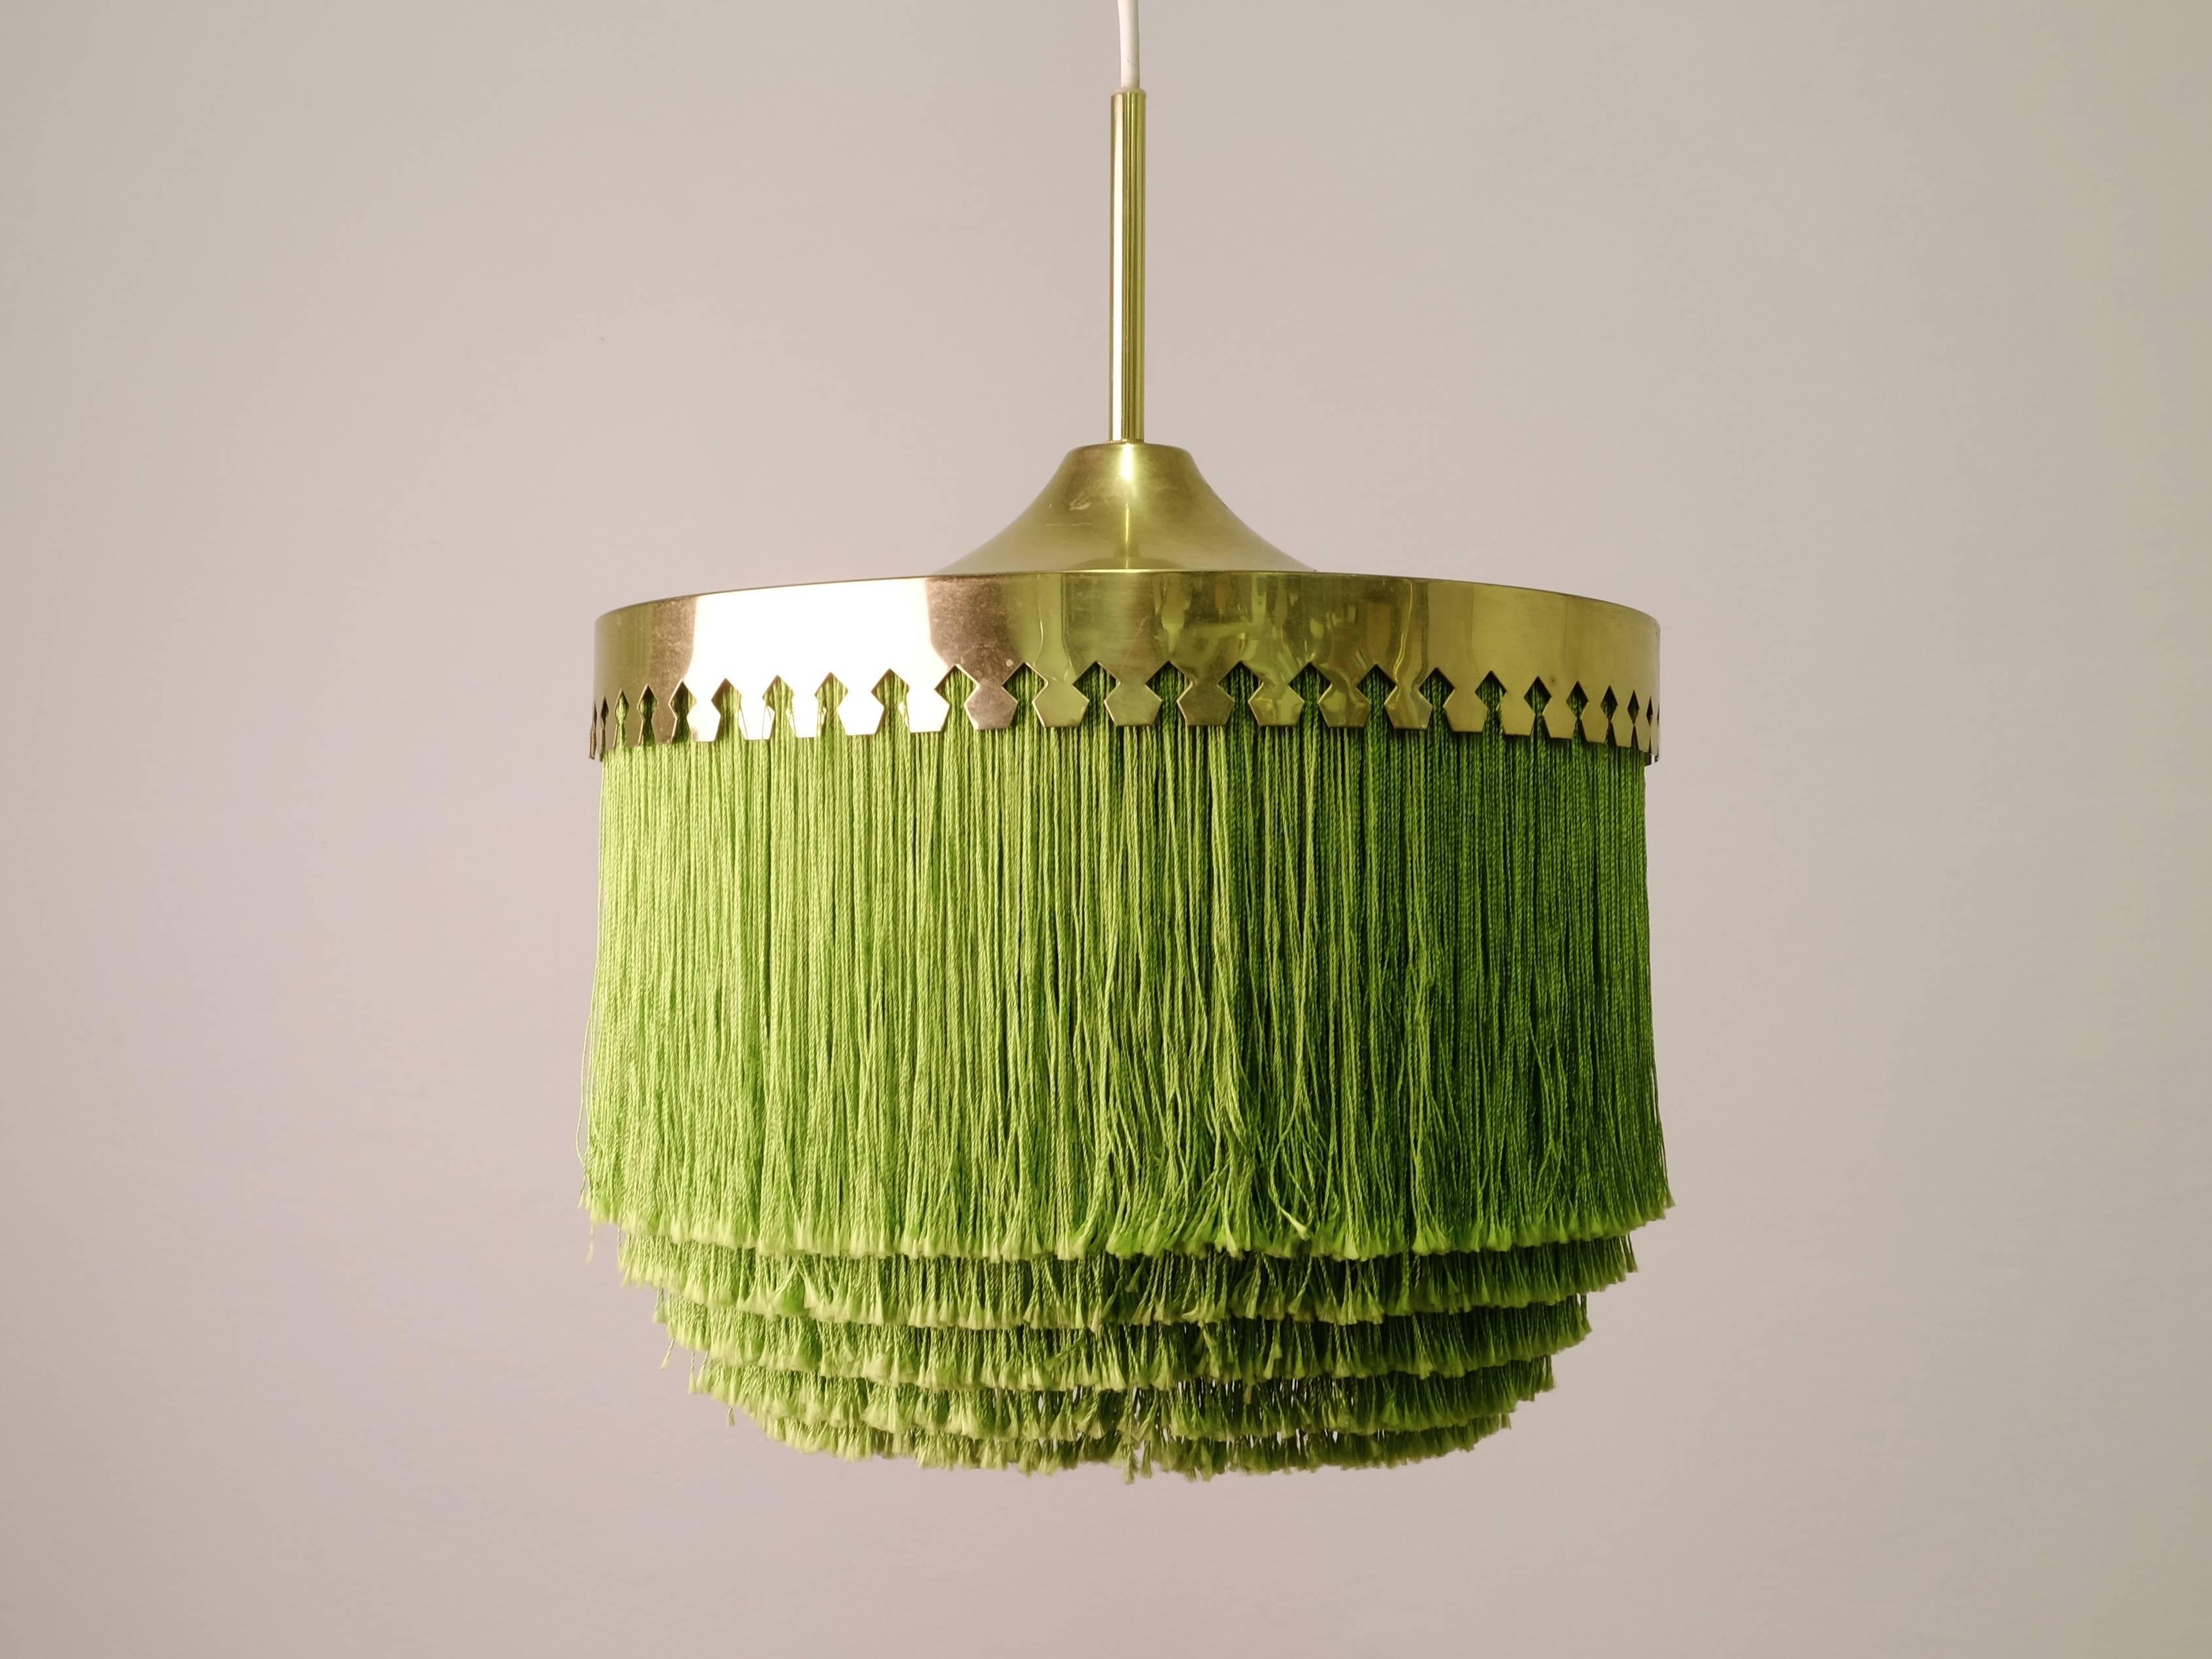 Green fringes and brass.
Produced by Hans-Agne Jakobsson, Markaryd, Sweden, 1960s.
Height is adjustable.